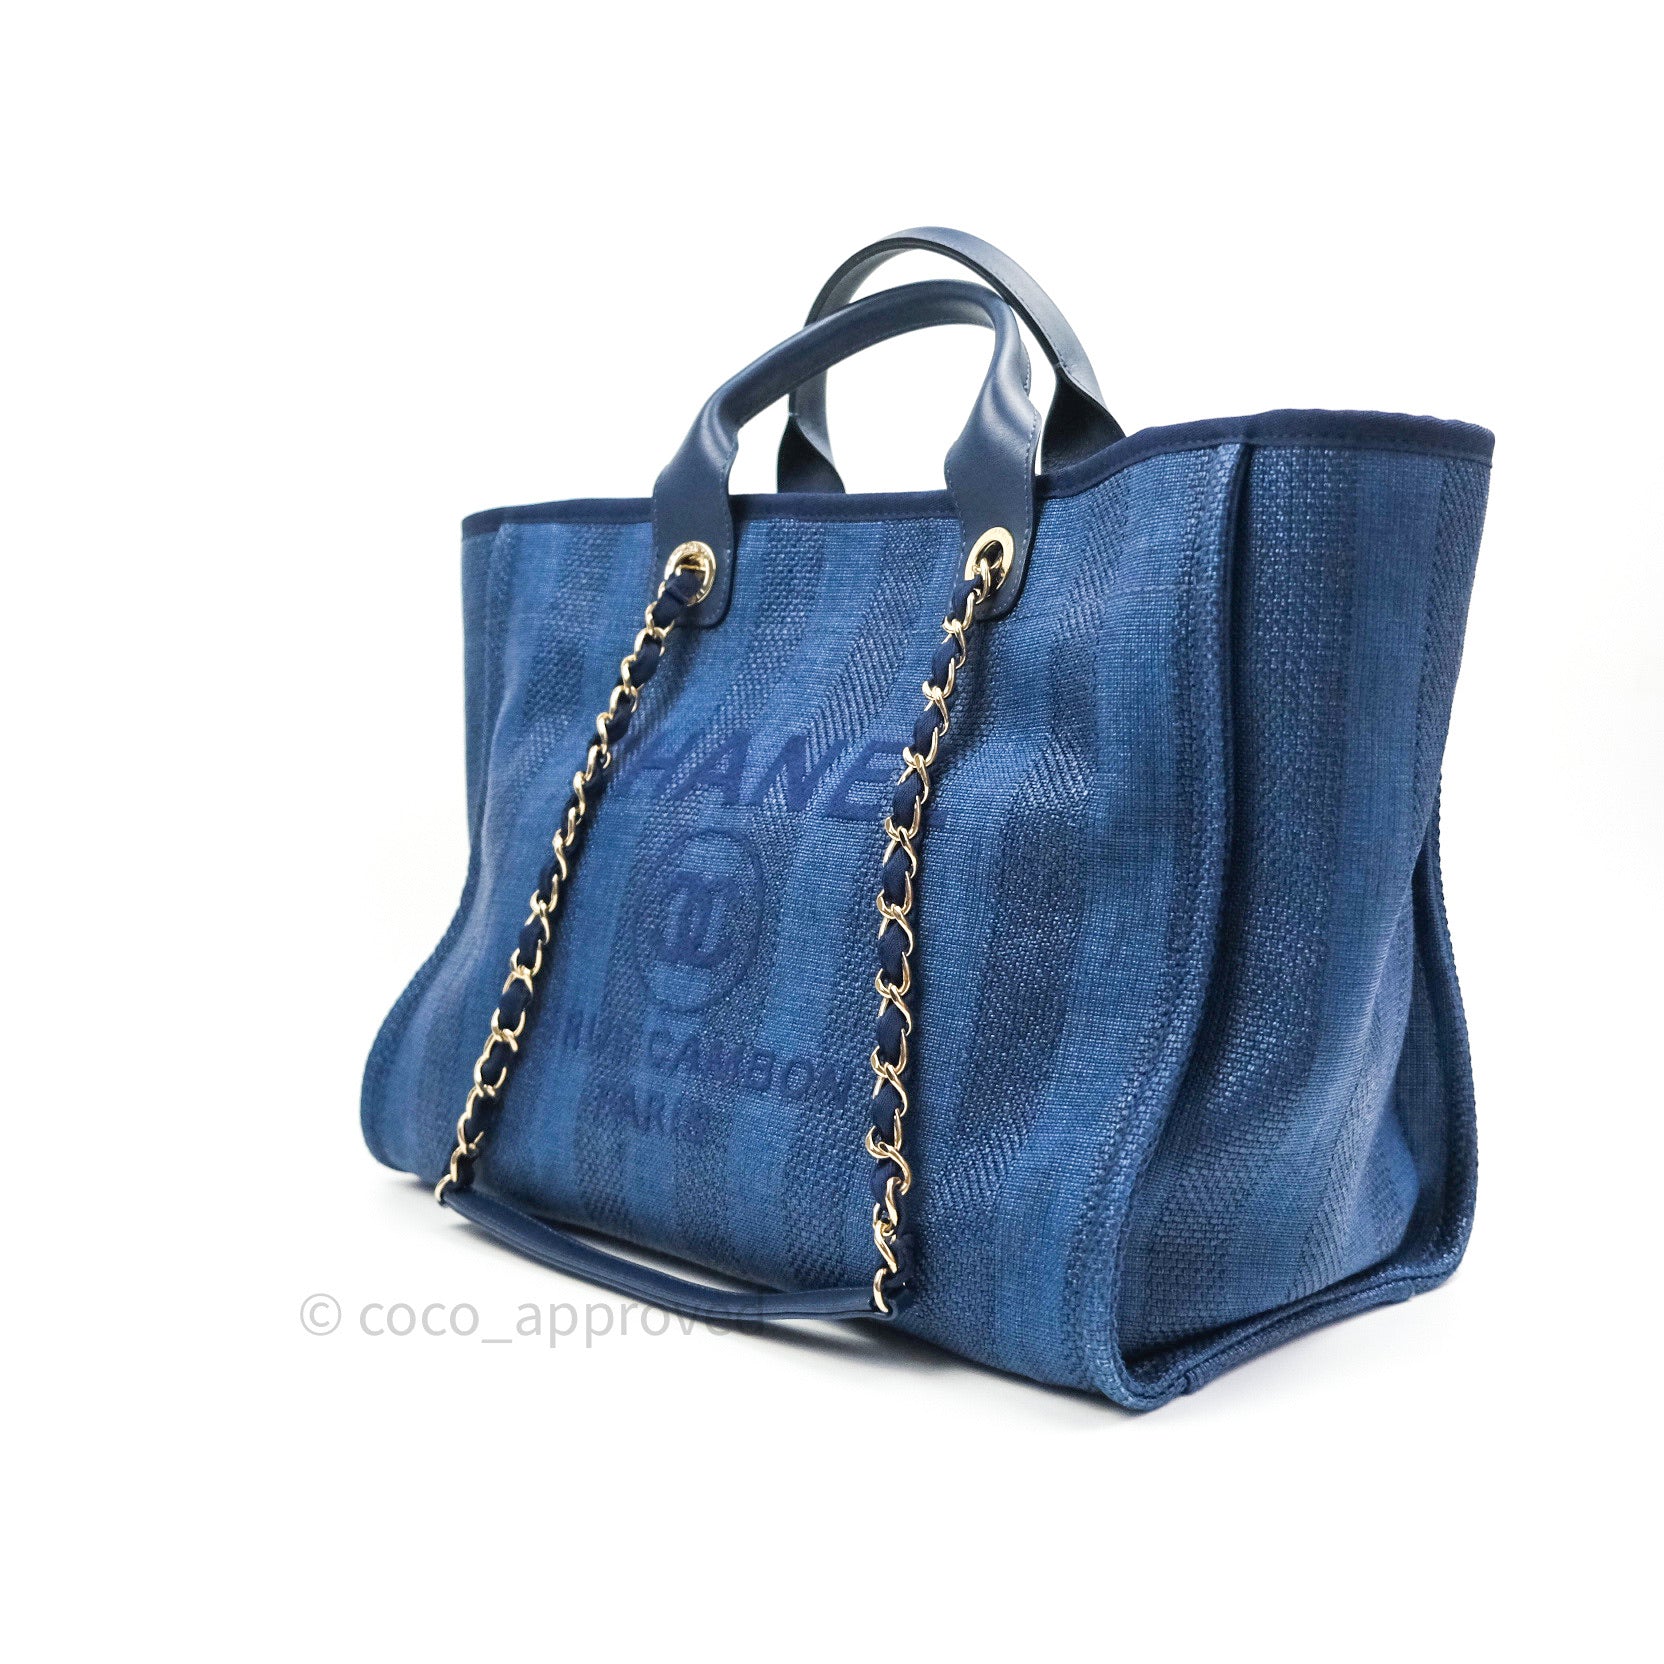 Chanel Large Studded Deauville Shopping Tote - Blue Totes, Handbags -  CHA901660